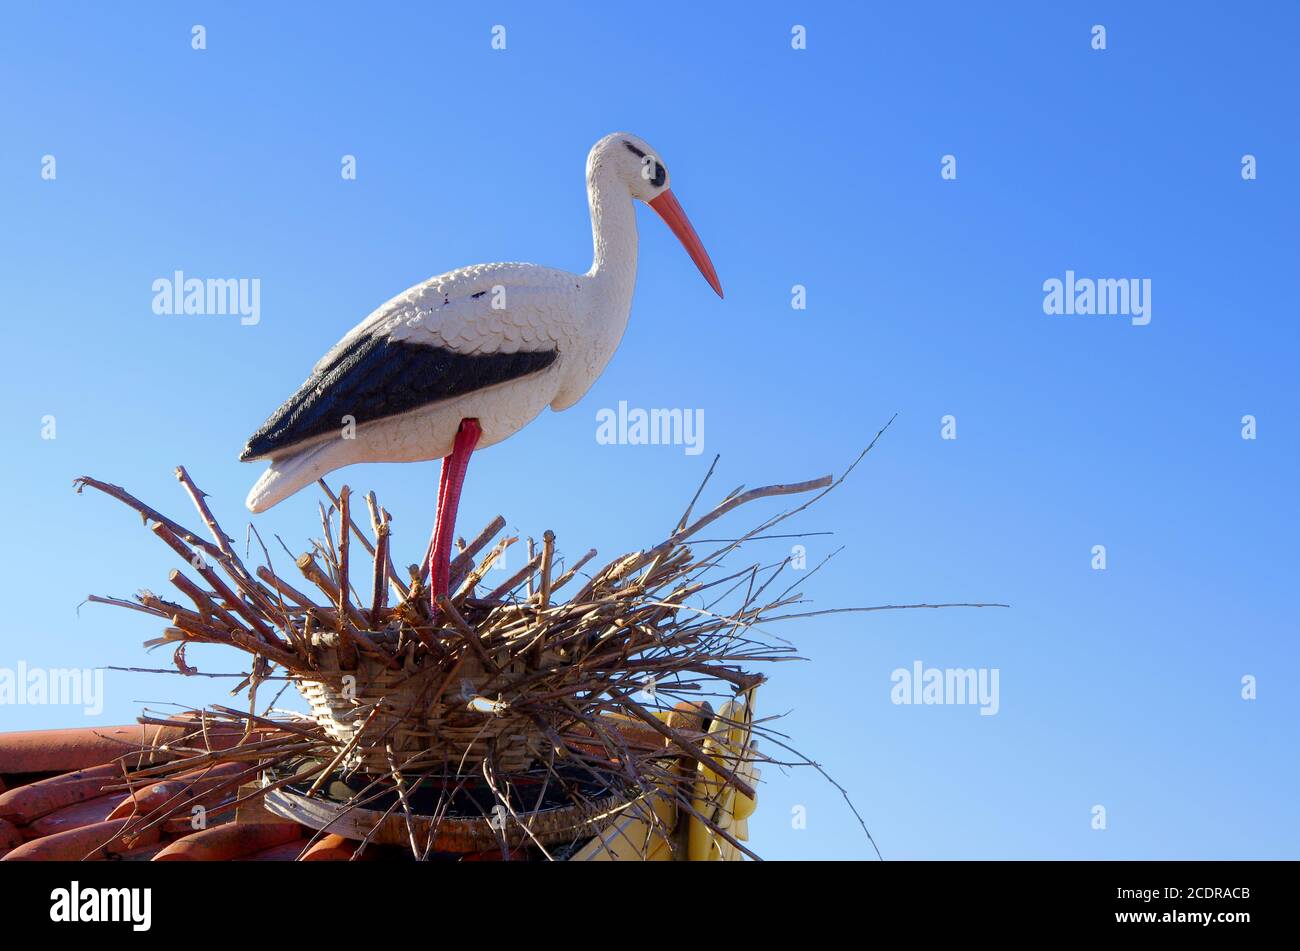 Plastic sculpture of a plastic stork in a nest. Stock Photo